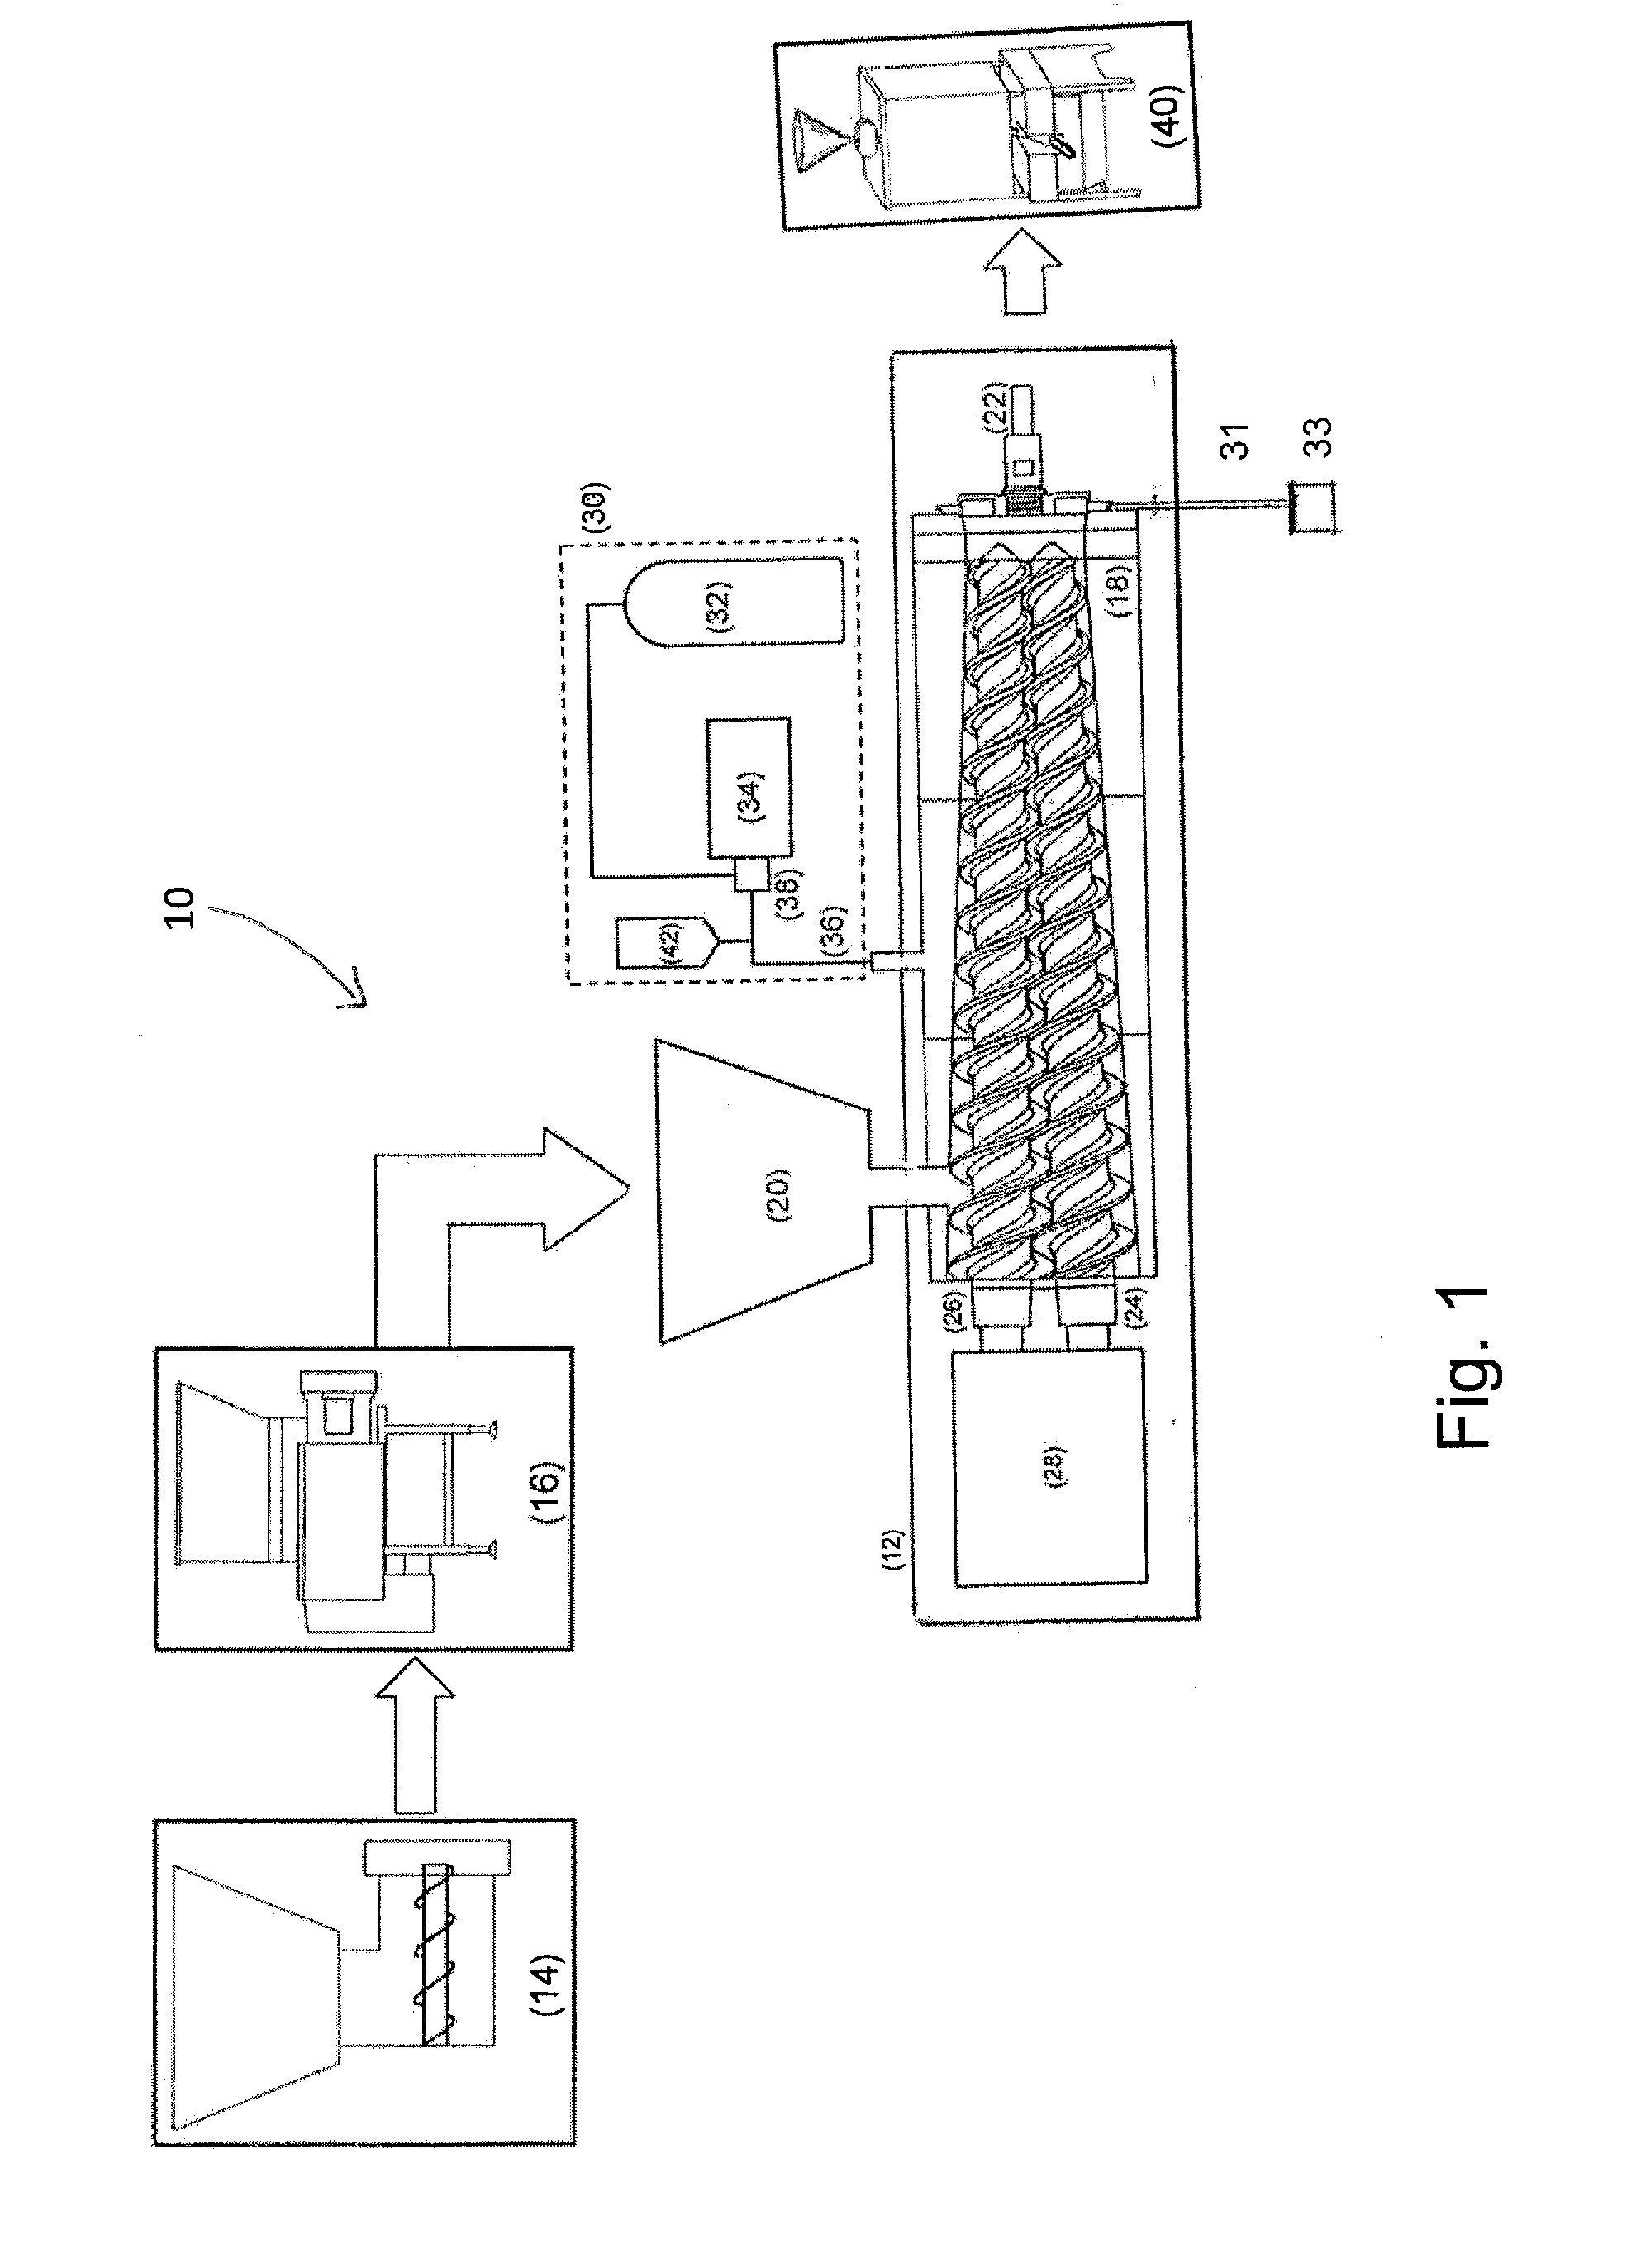 Method and apparatus for the sterilization of ground meat using supercritical co2